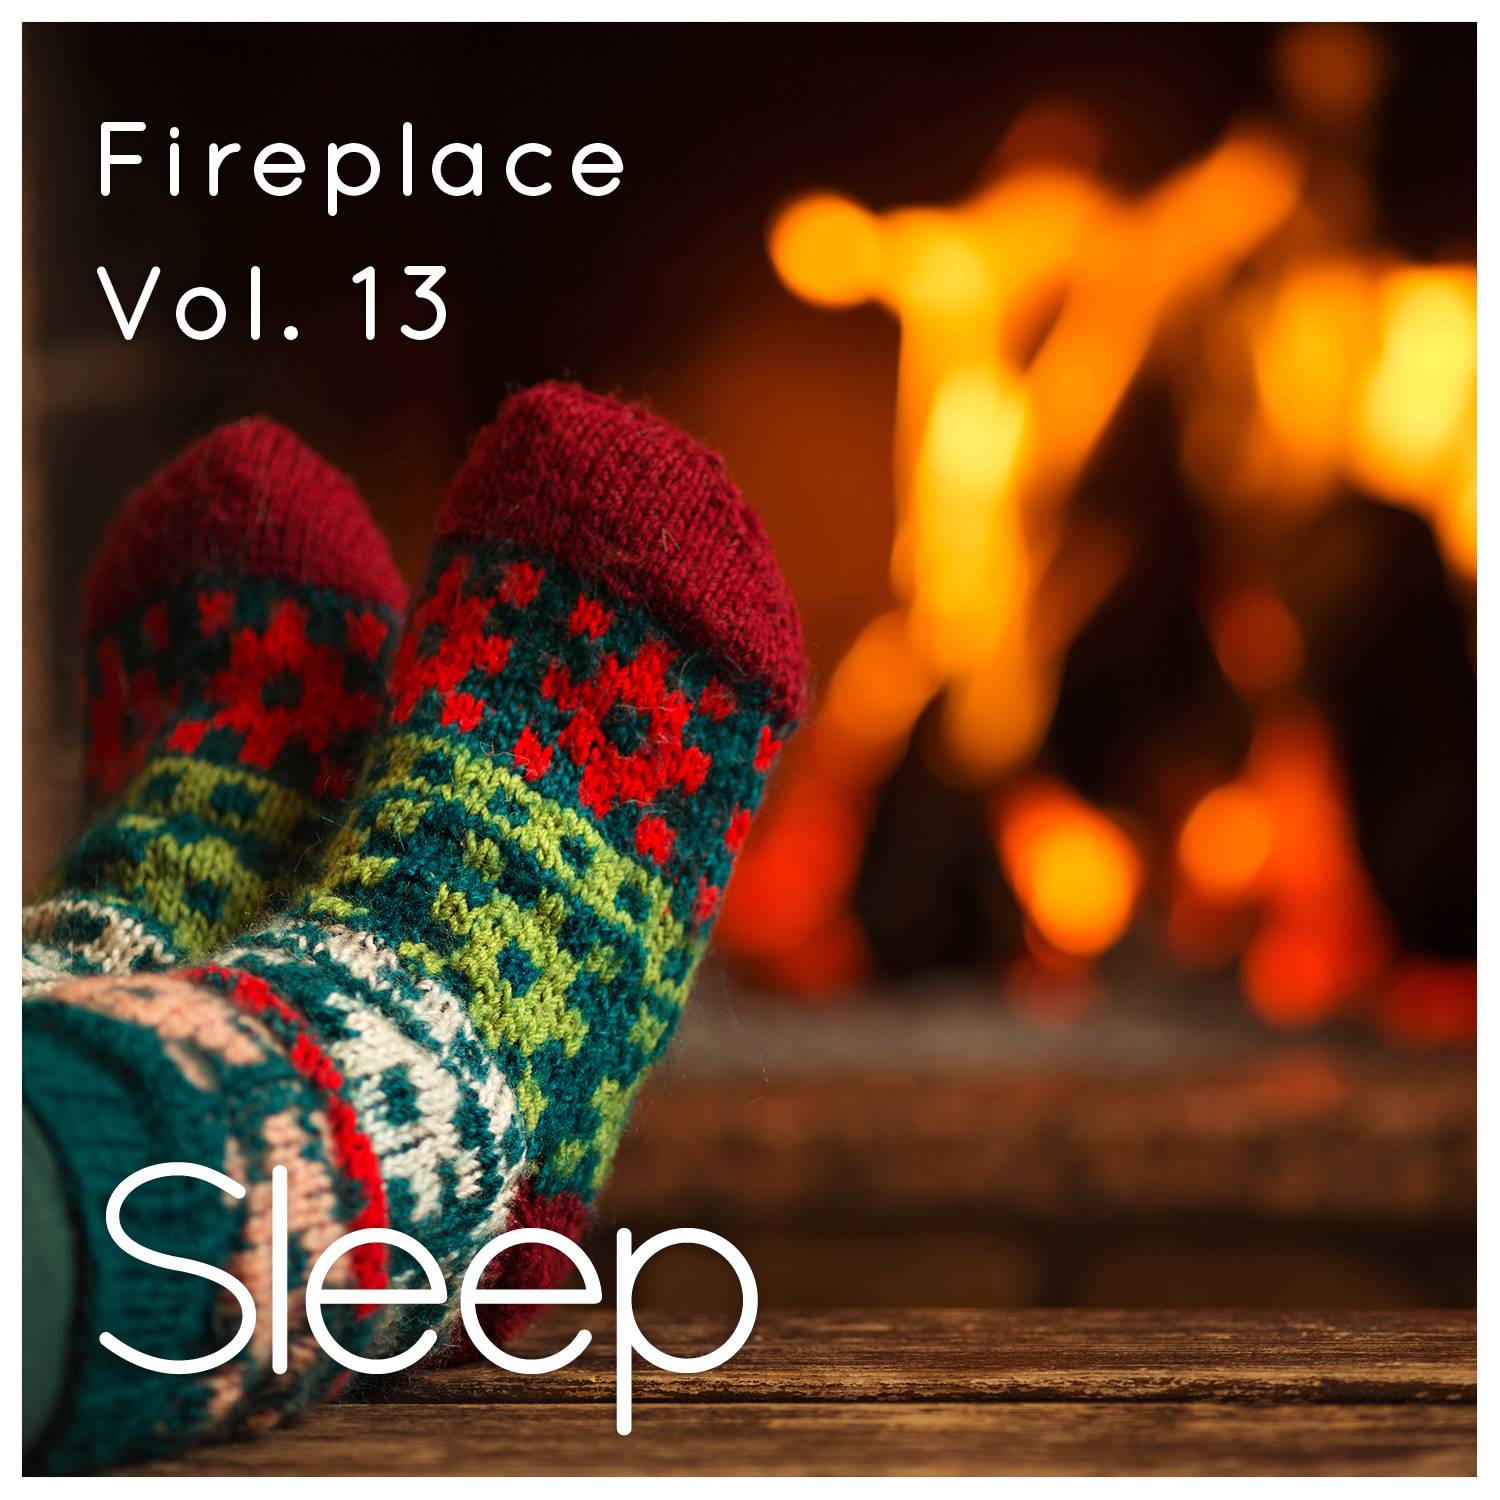 Sleep by Fireplace in Cabin, Vol. 13